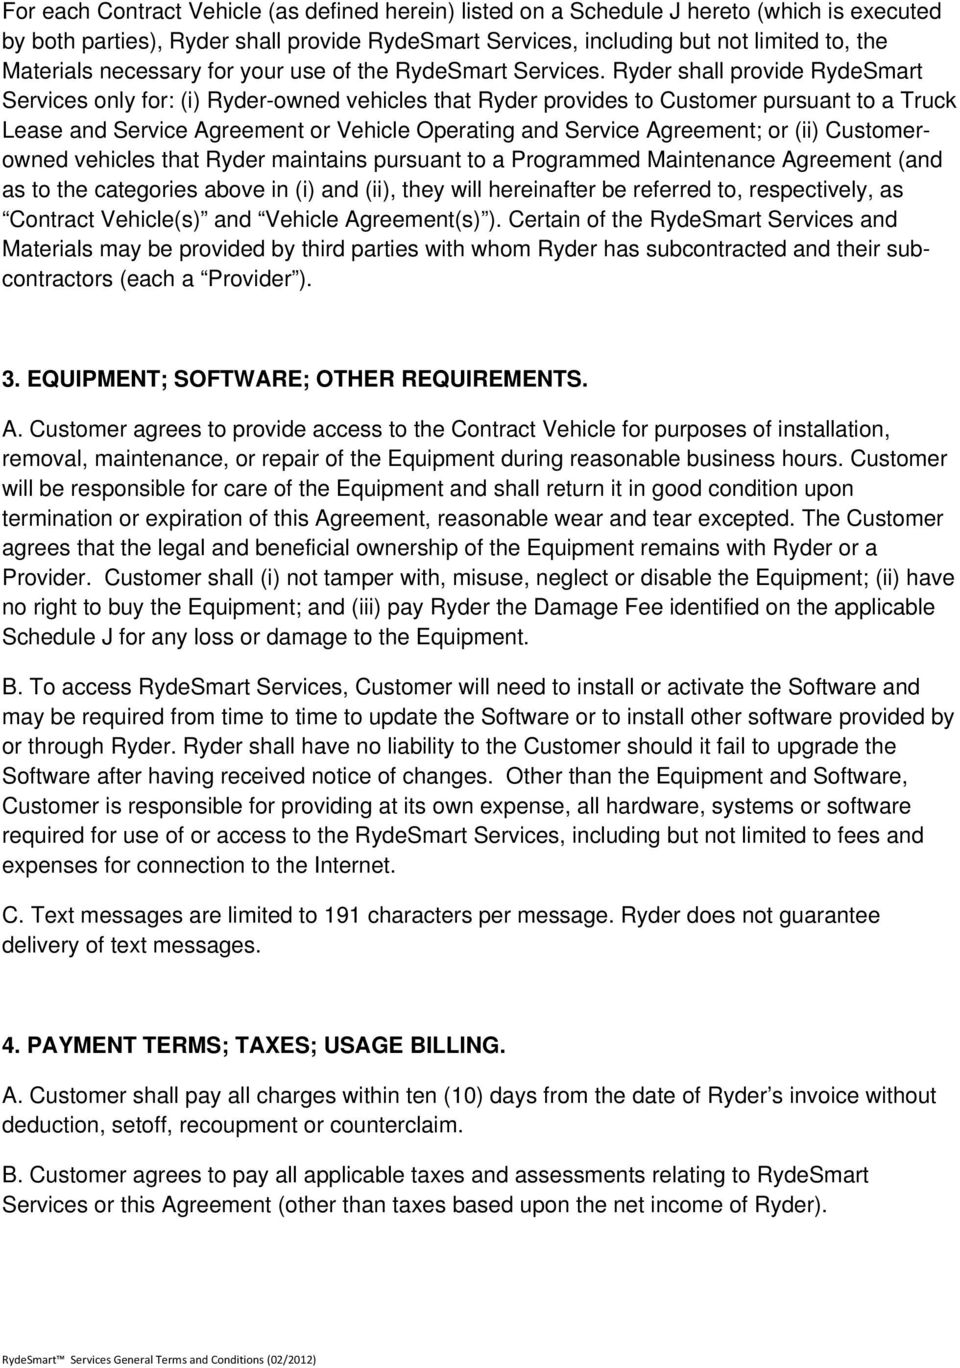 Maintenance Agreement Terms And Conditions Rydesmart Services General Terms And Conditions Pdf